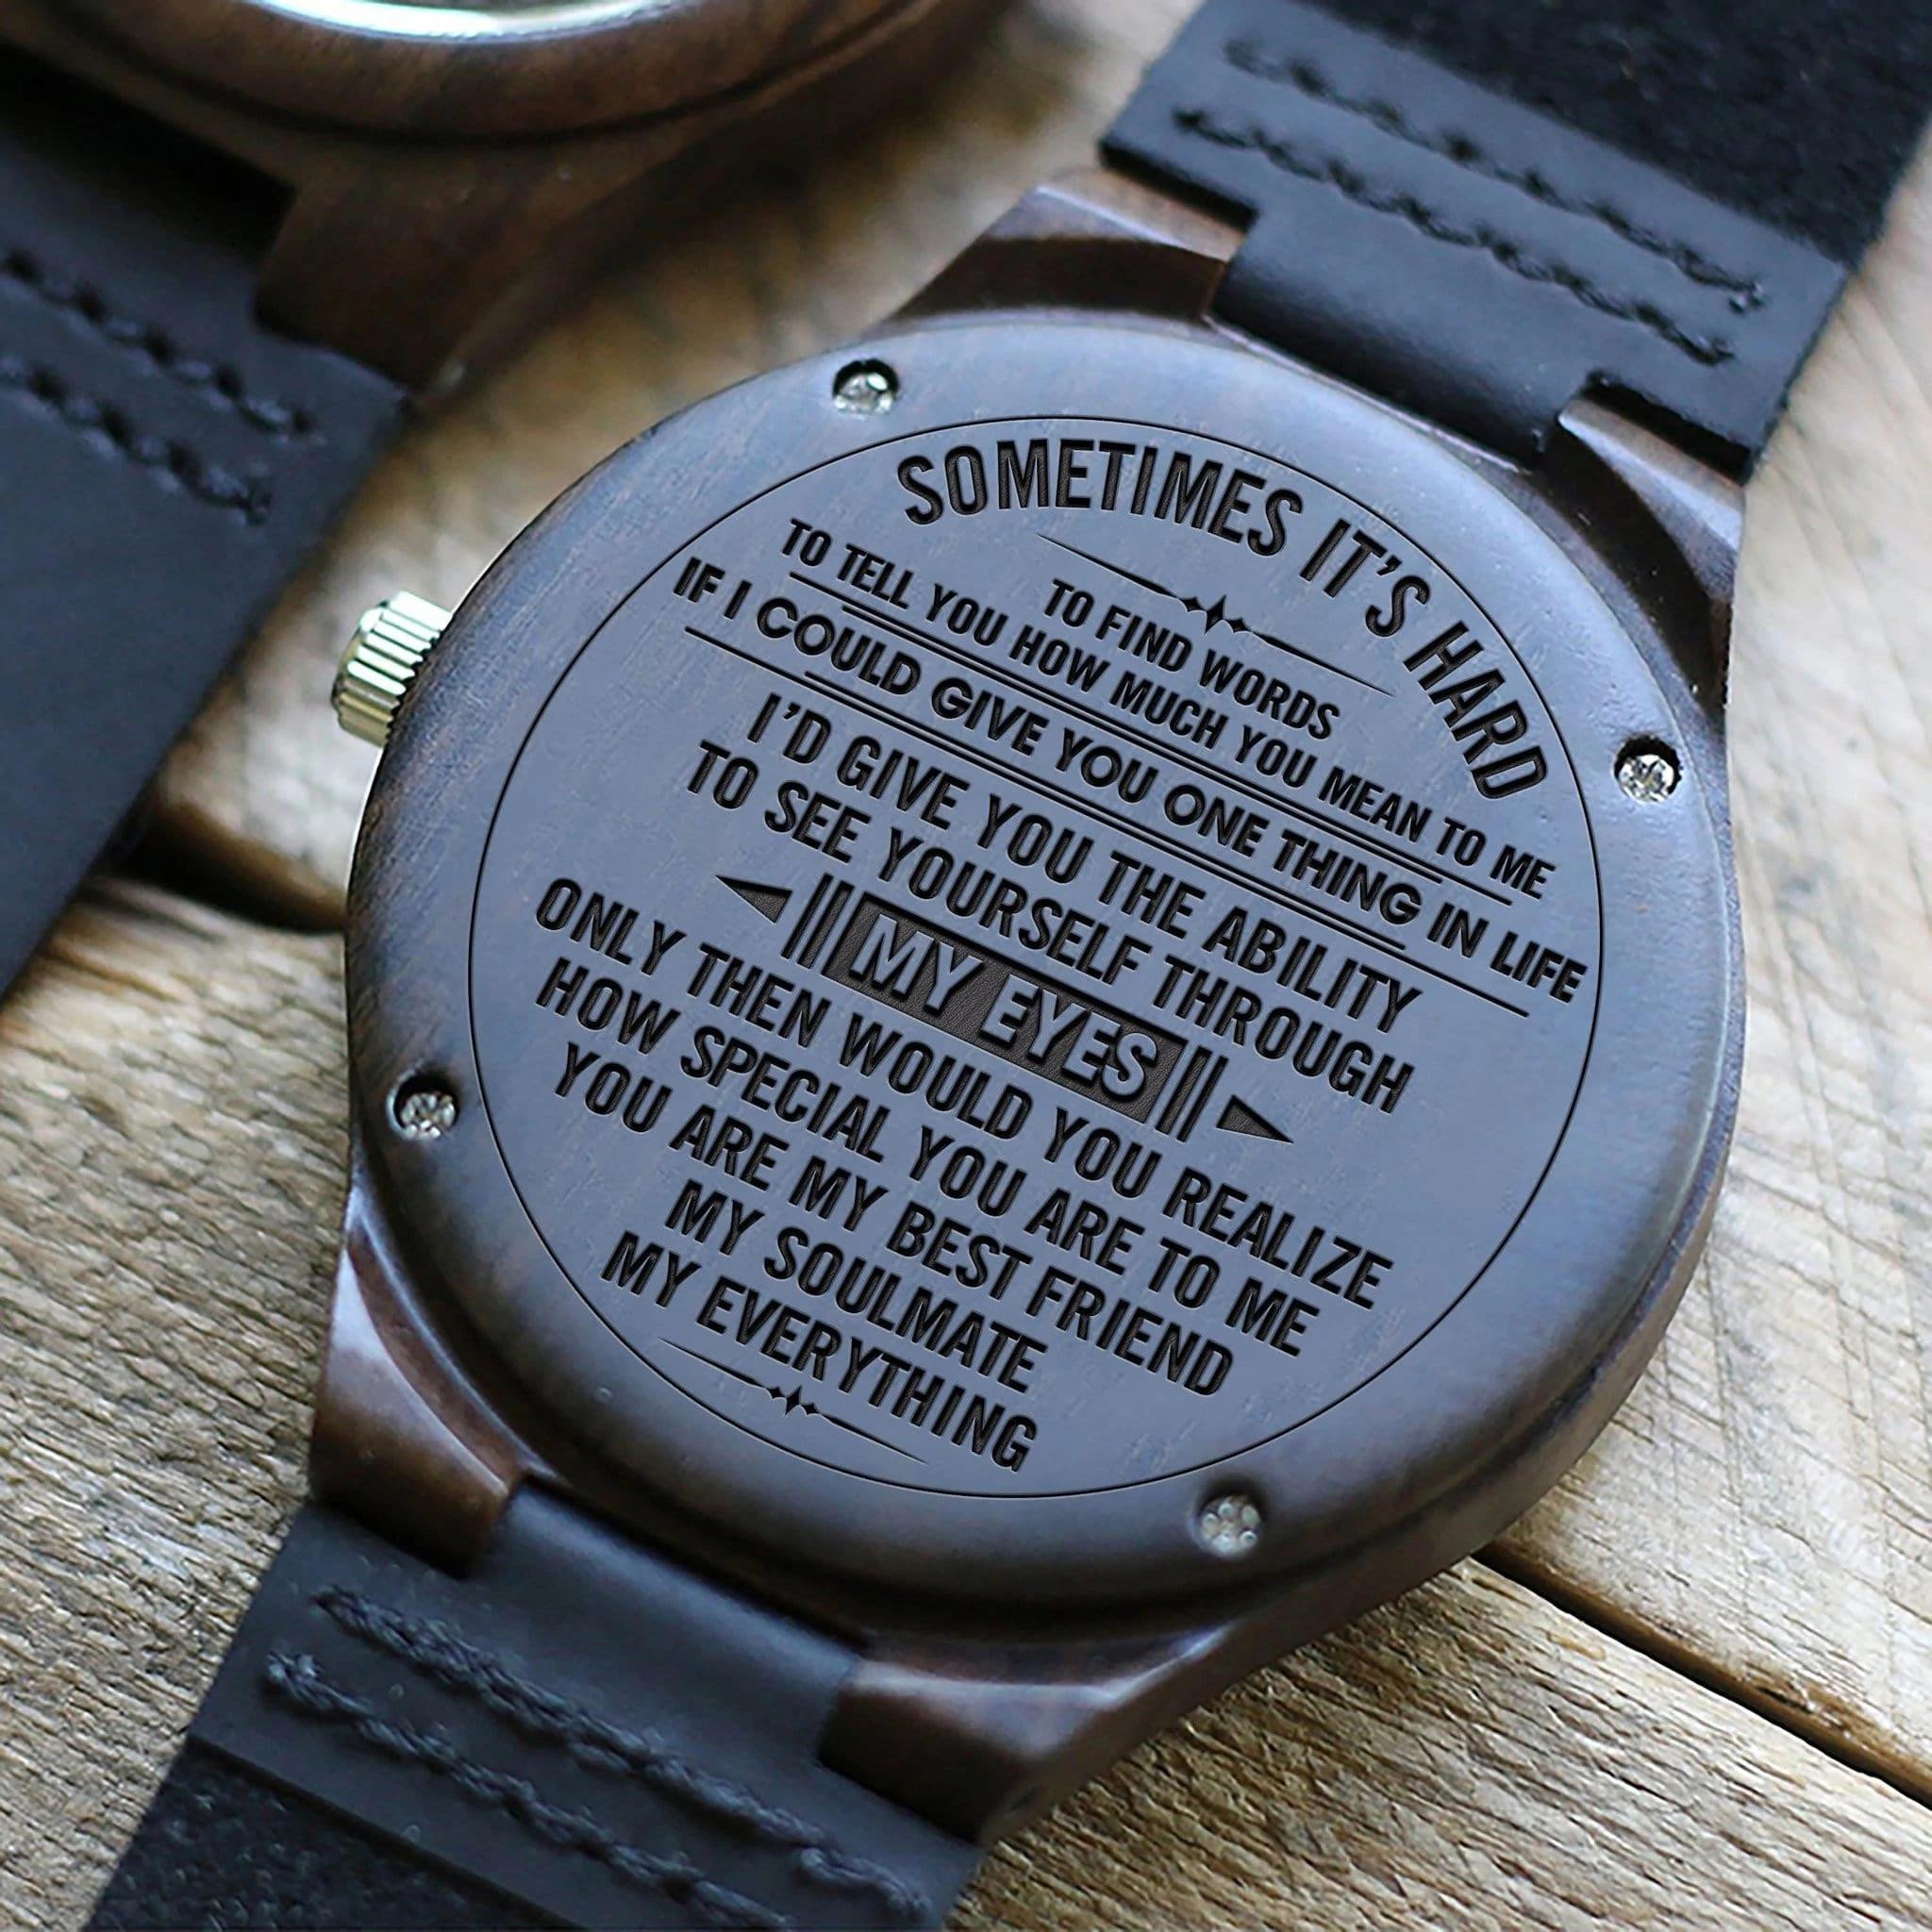 See Yourself Through My Eyes Engraved Wooden Watch Gift For Husband